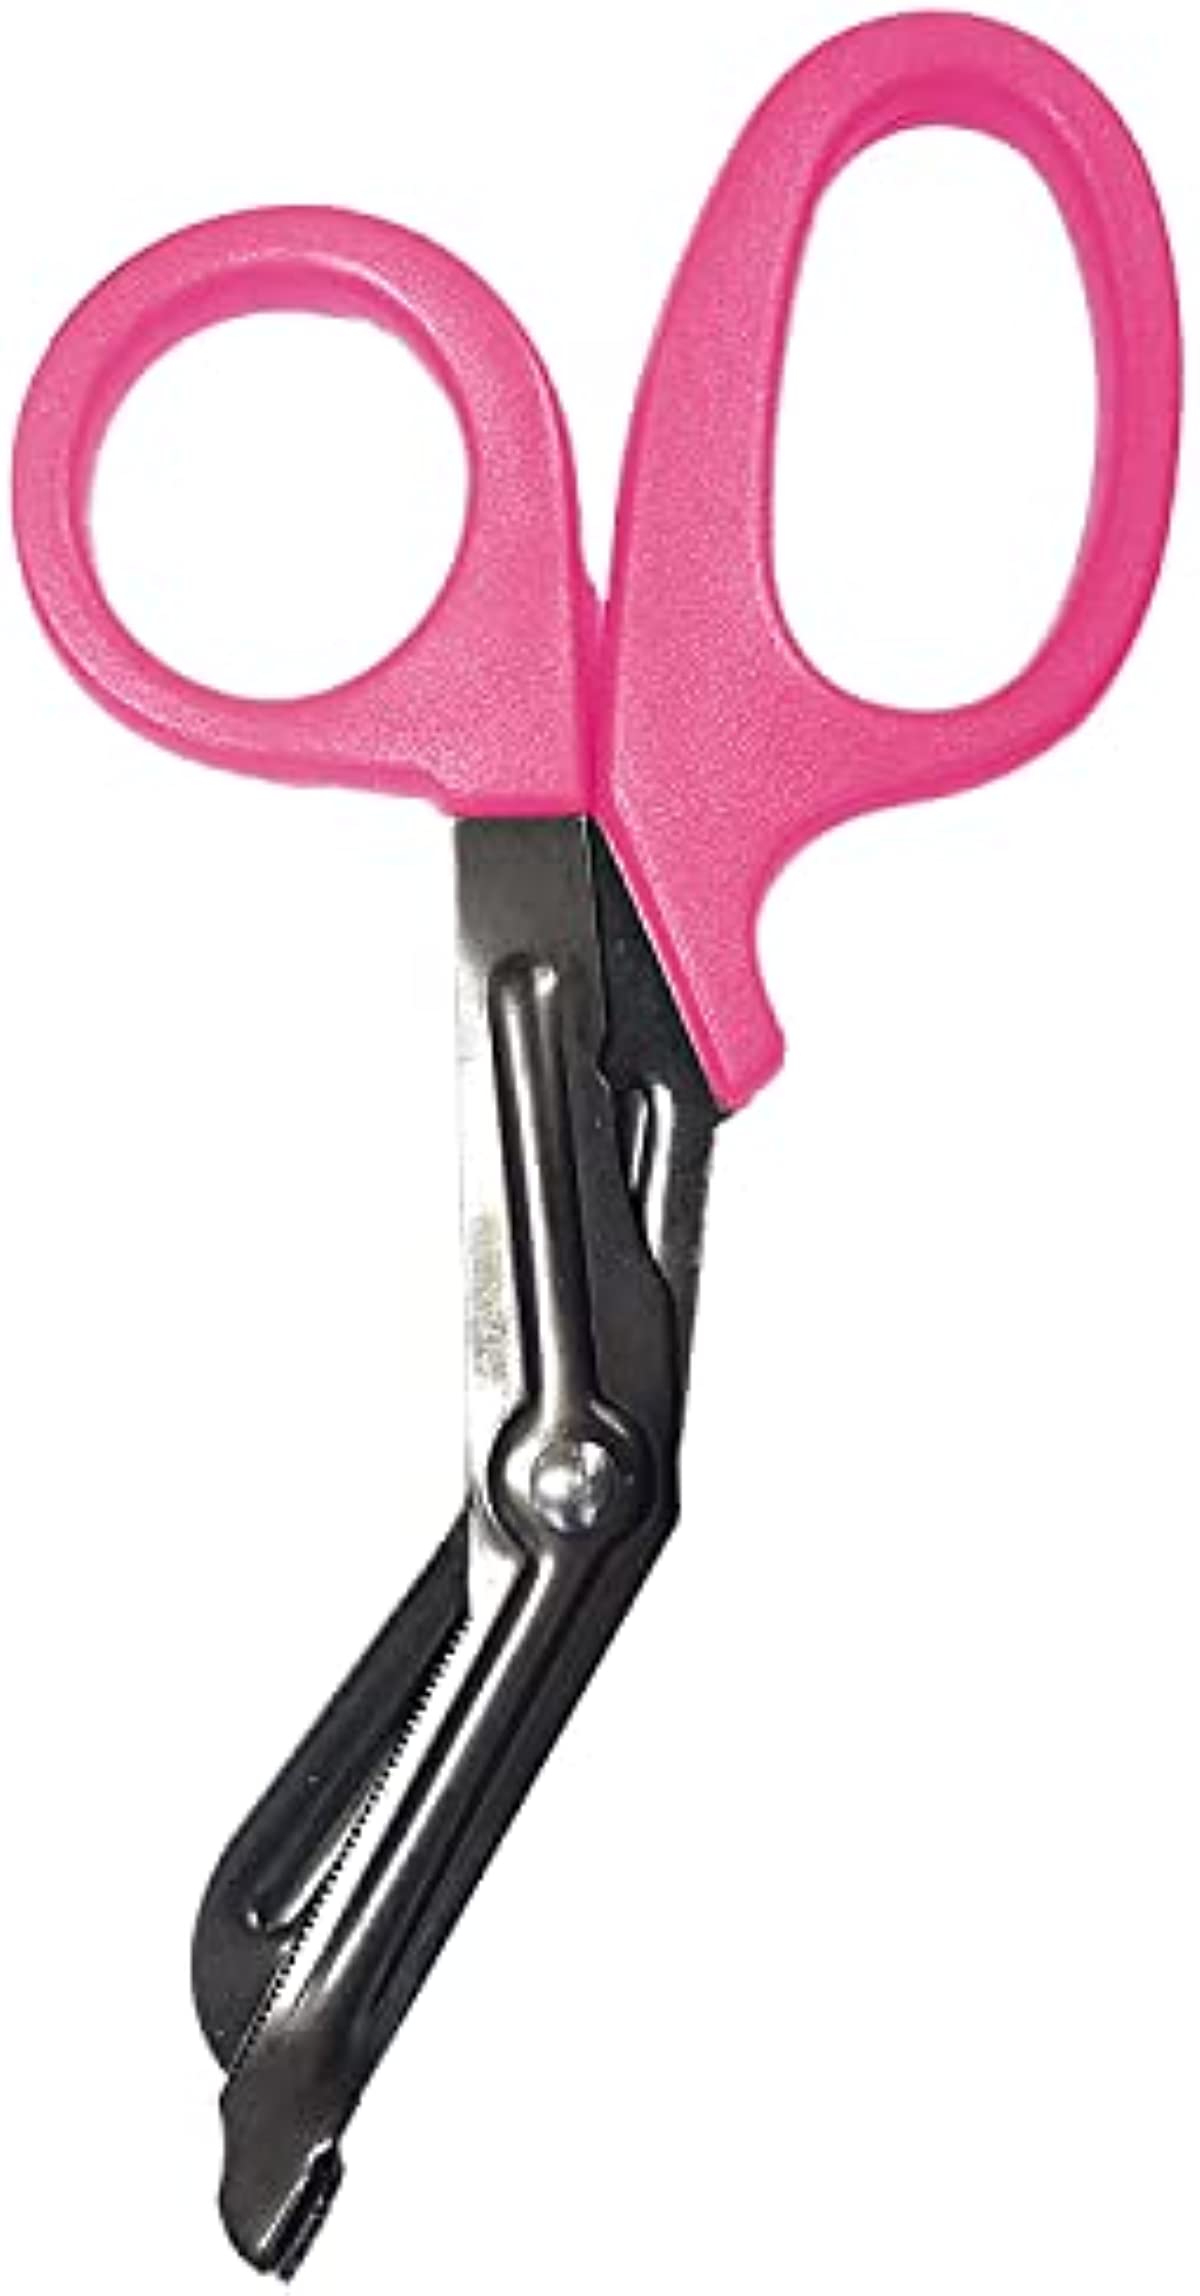 Ever Ready First Aid Autoclavable Titanium Bonded Bandage Shears 7 1/4\" Bent, Pink - 2 Pack